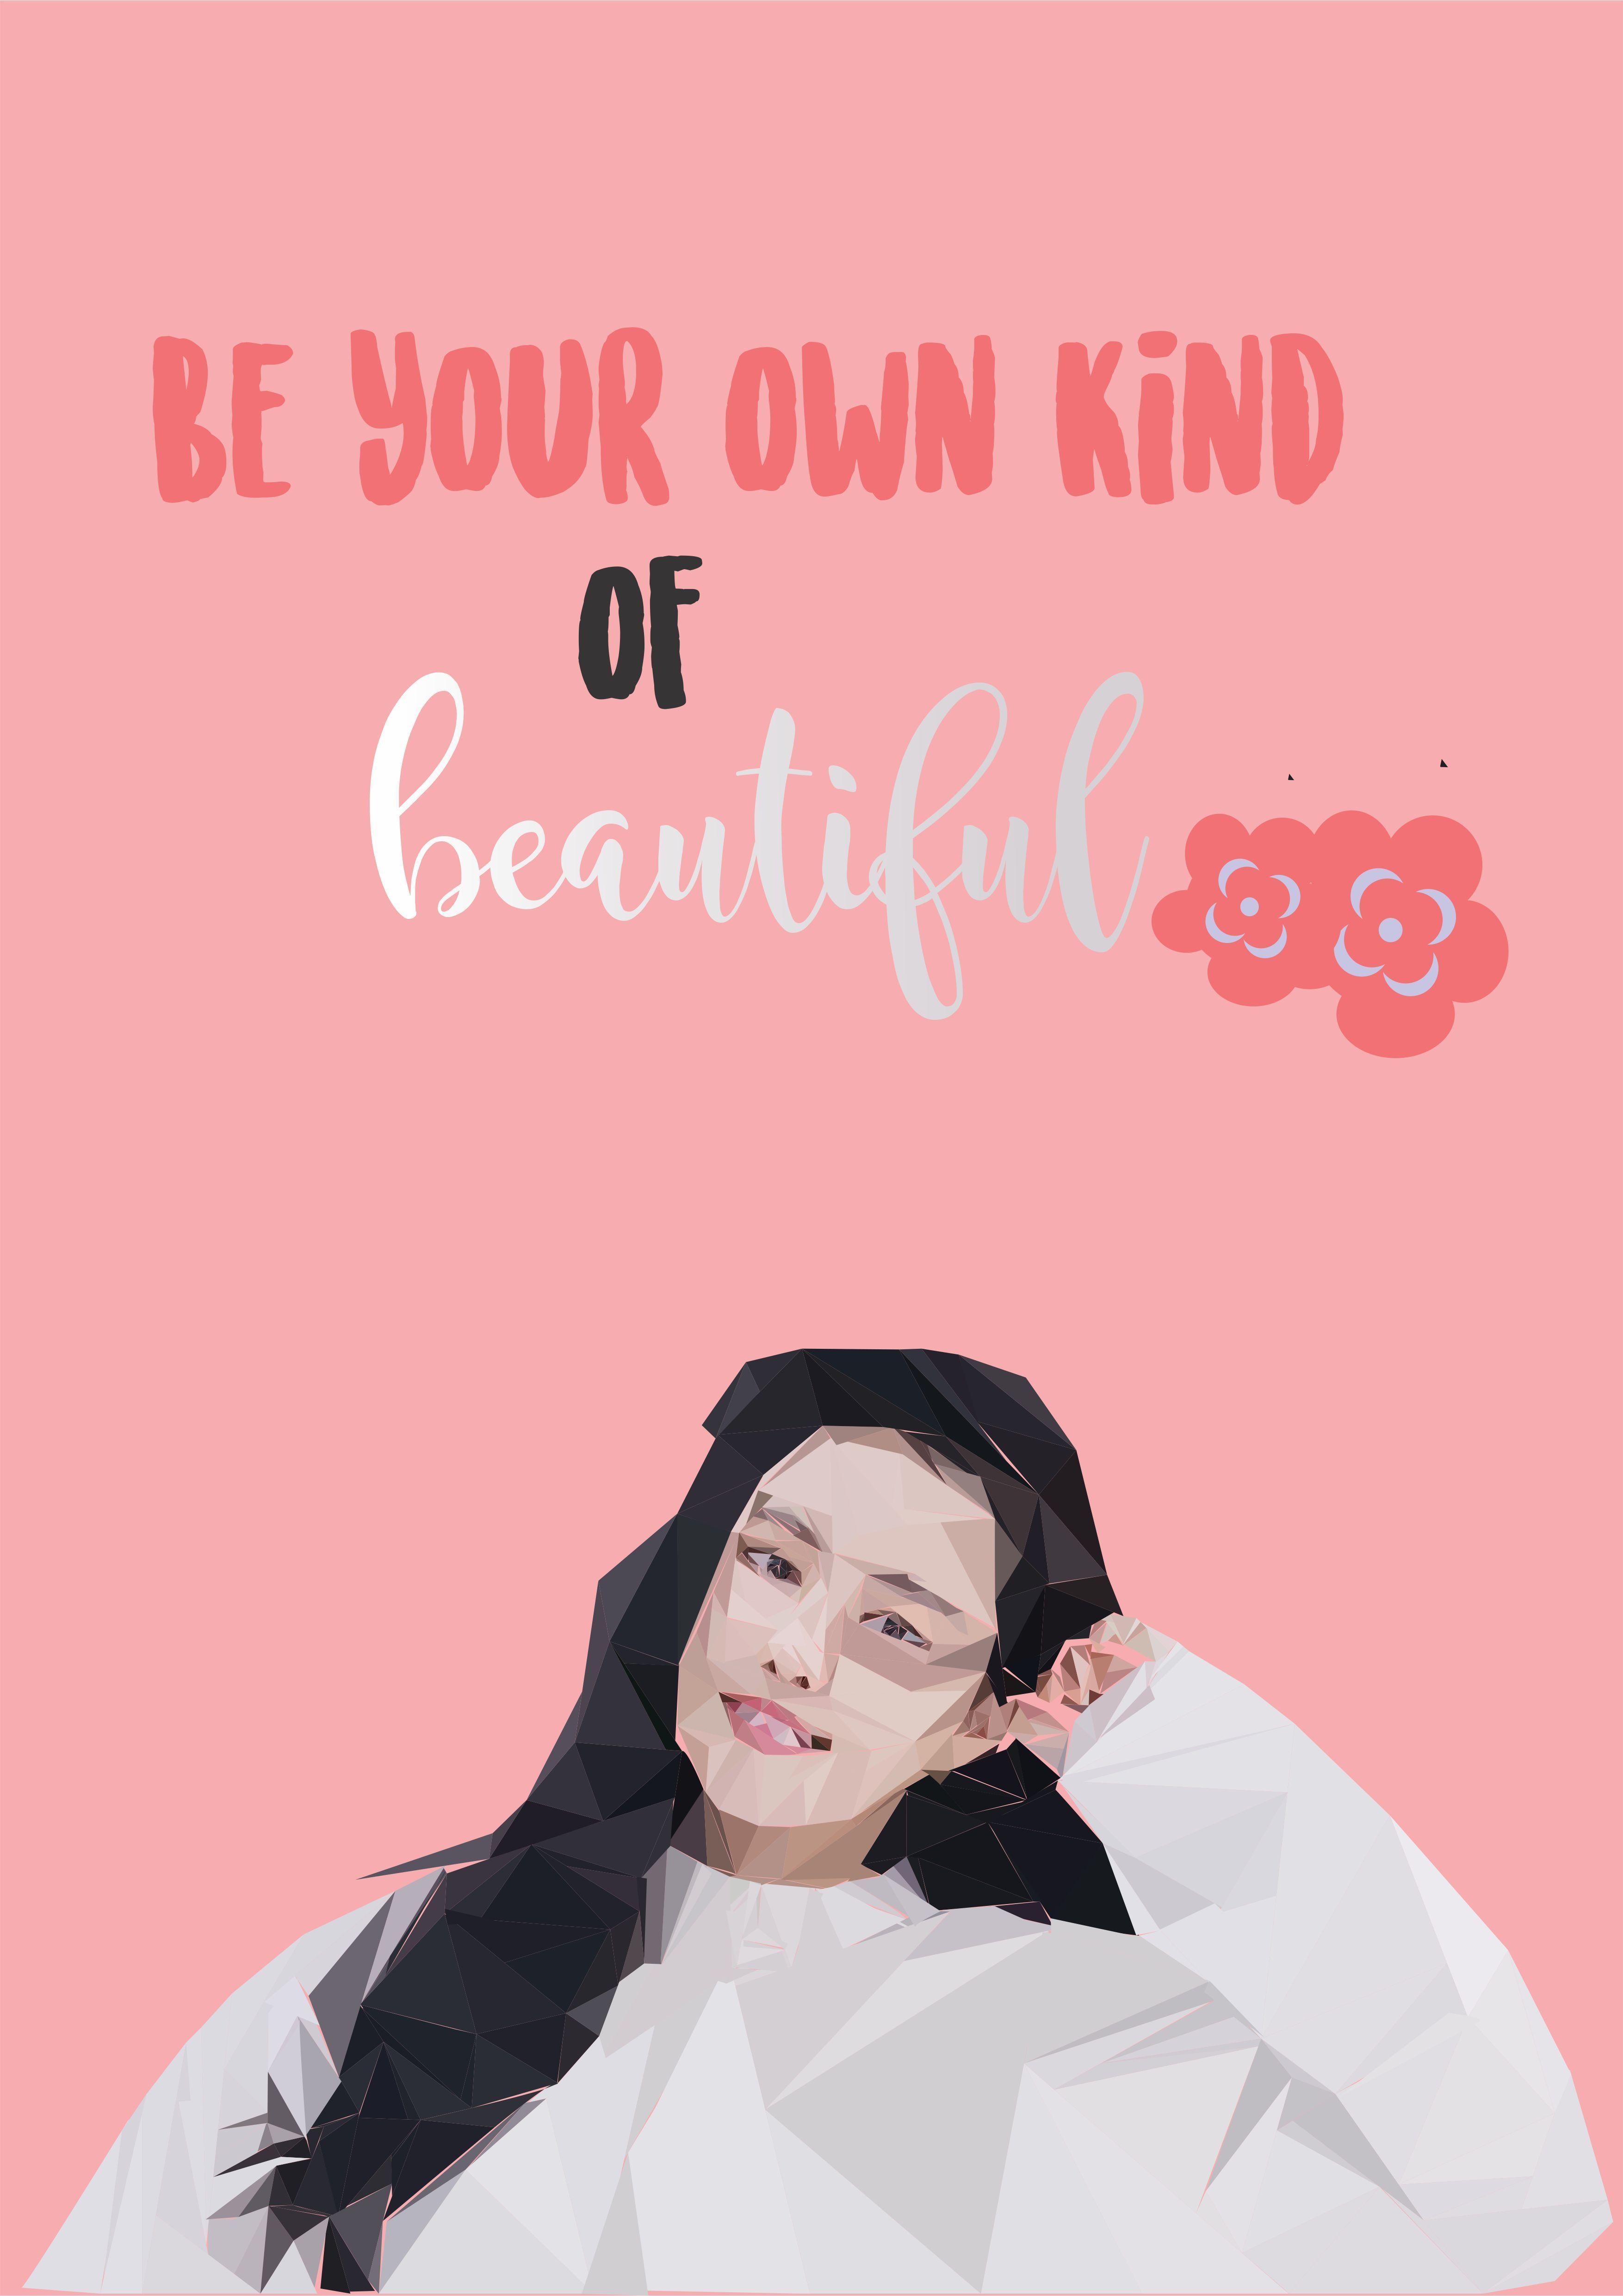 Be your own kind of beautiful. Everyone in this world are unique